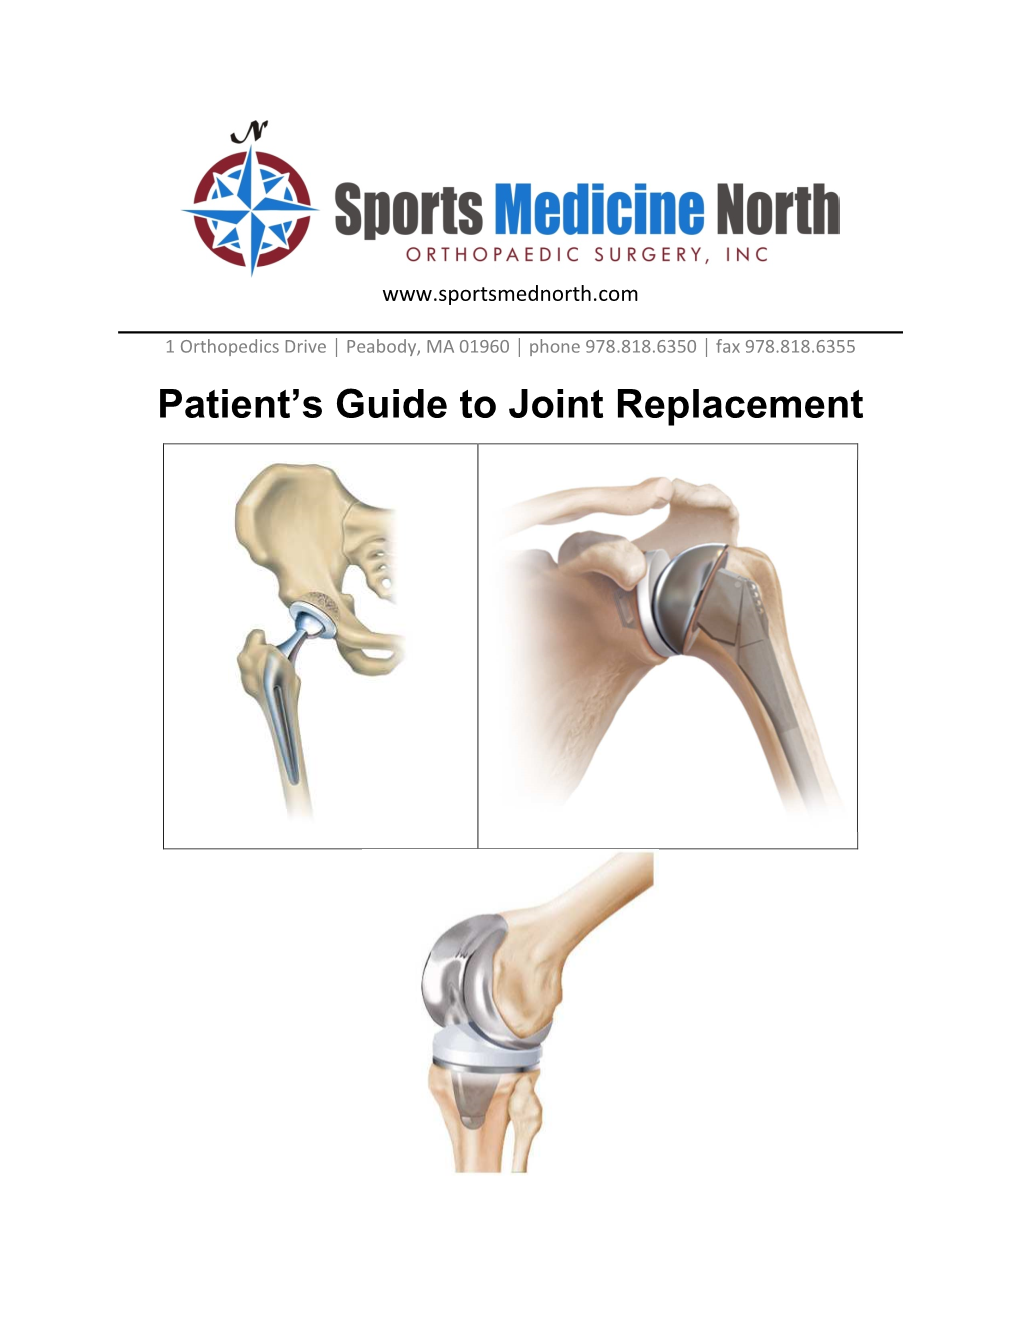 Patient's Guide to Joint Replacement